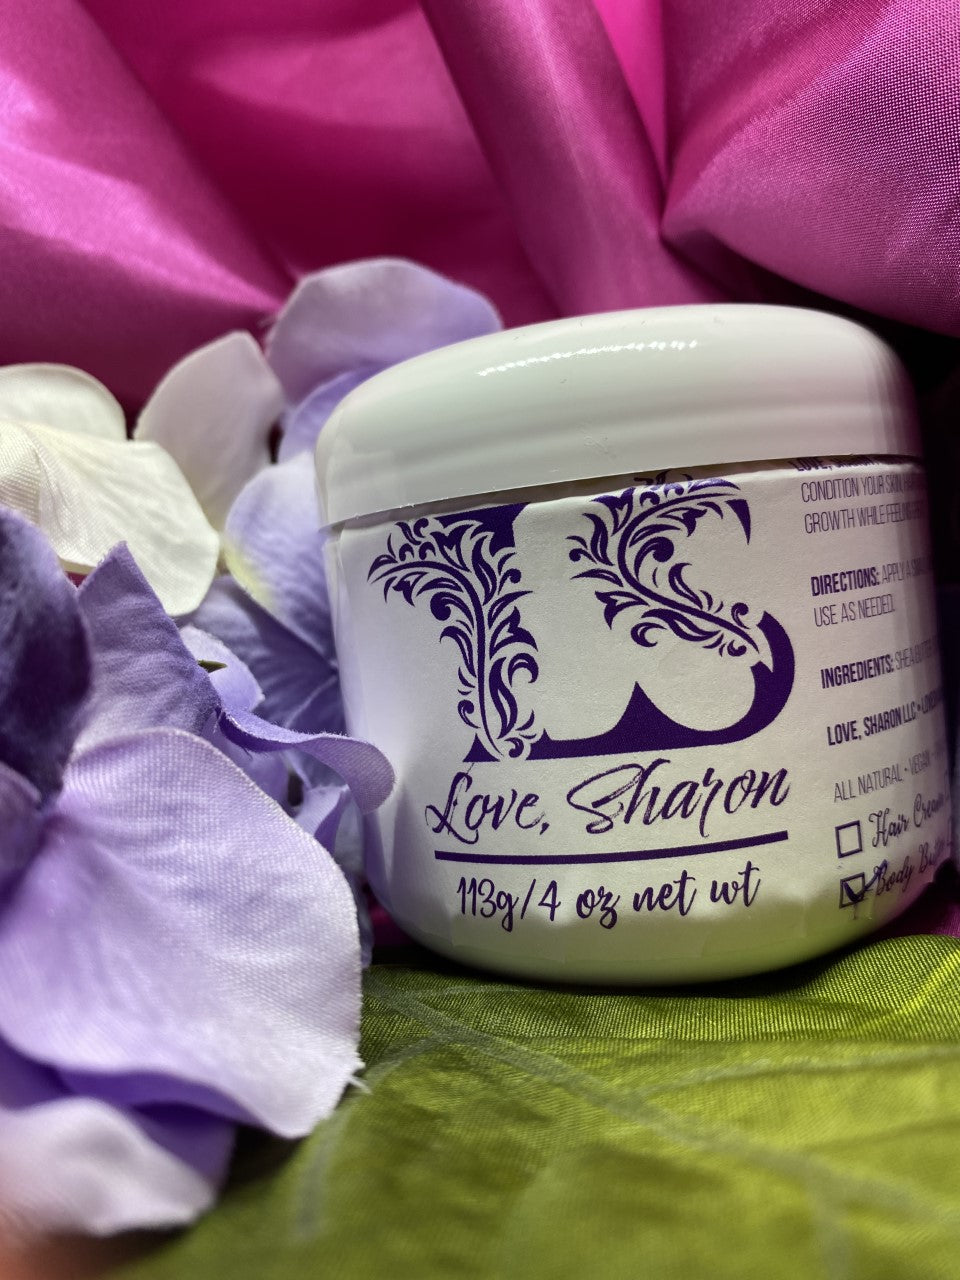 Pain Relief Body Butter